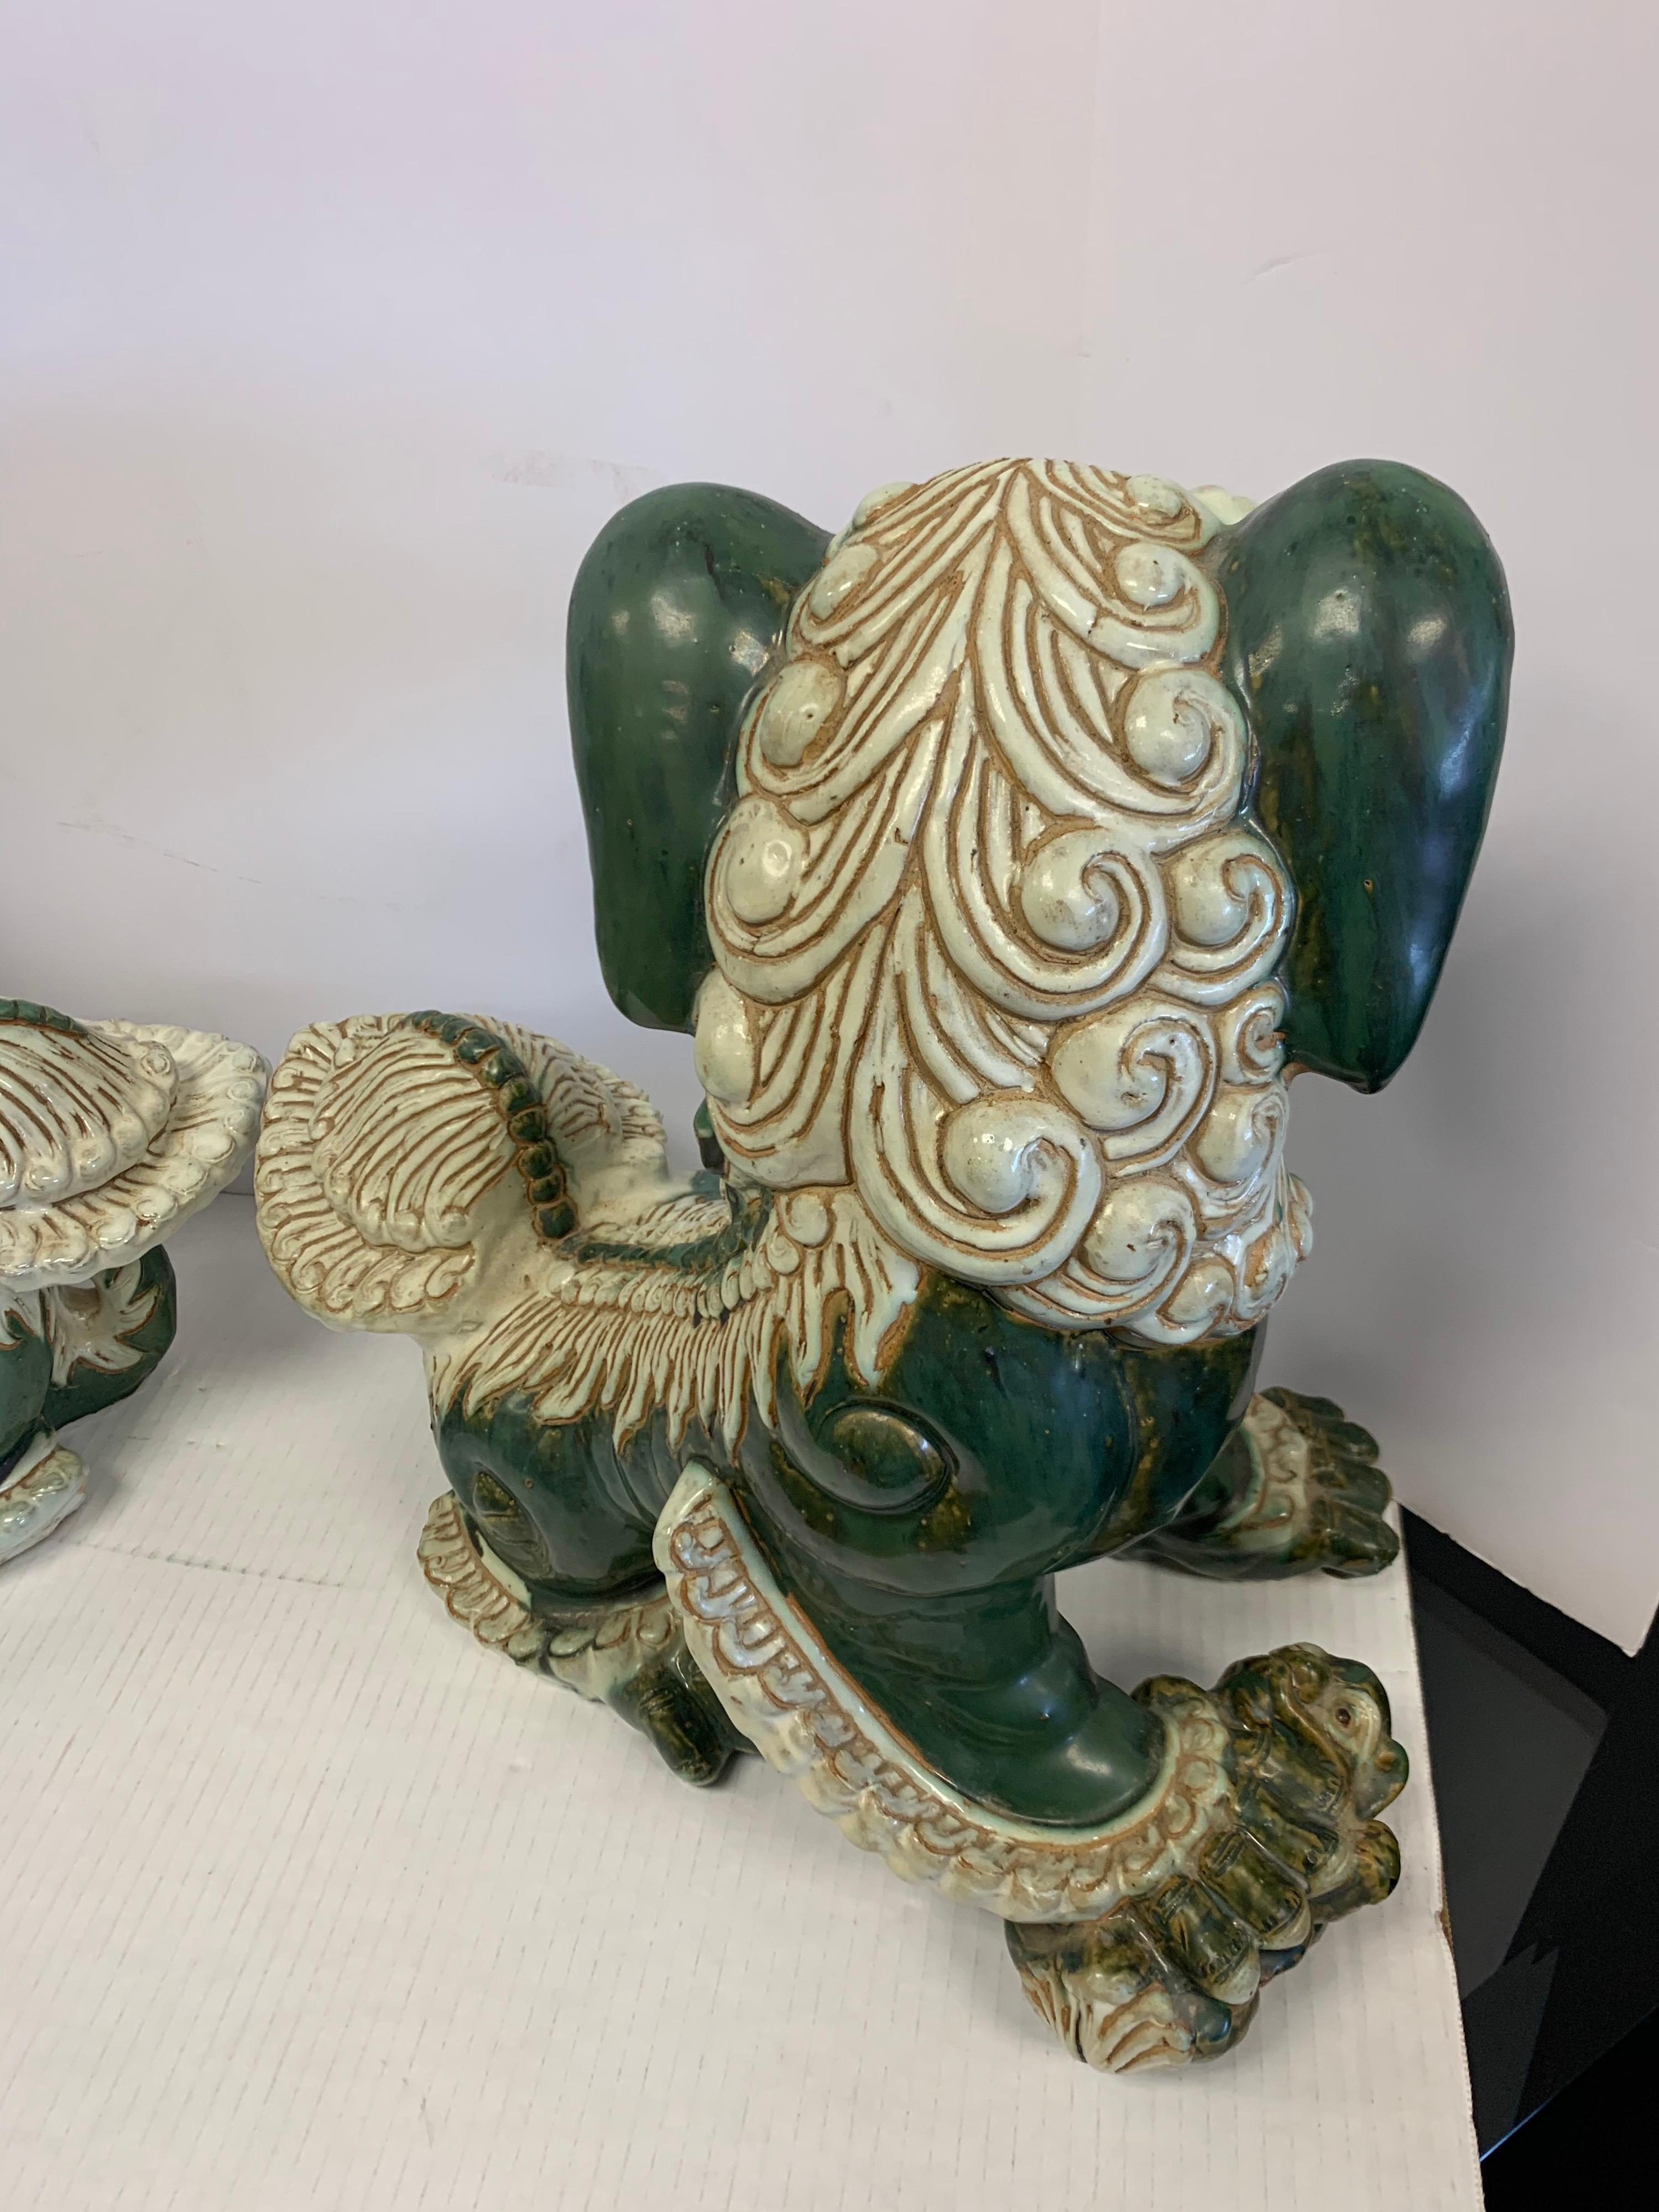 Extra-Large Pair of Chinese Glazed Porcelain Foo Dogs Sculptures 1